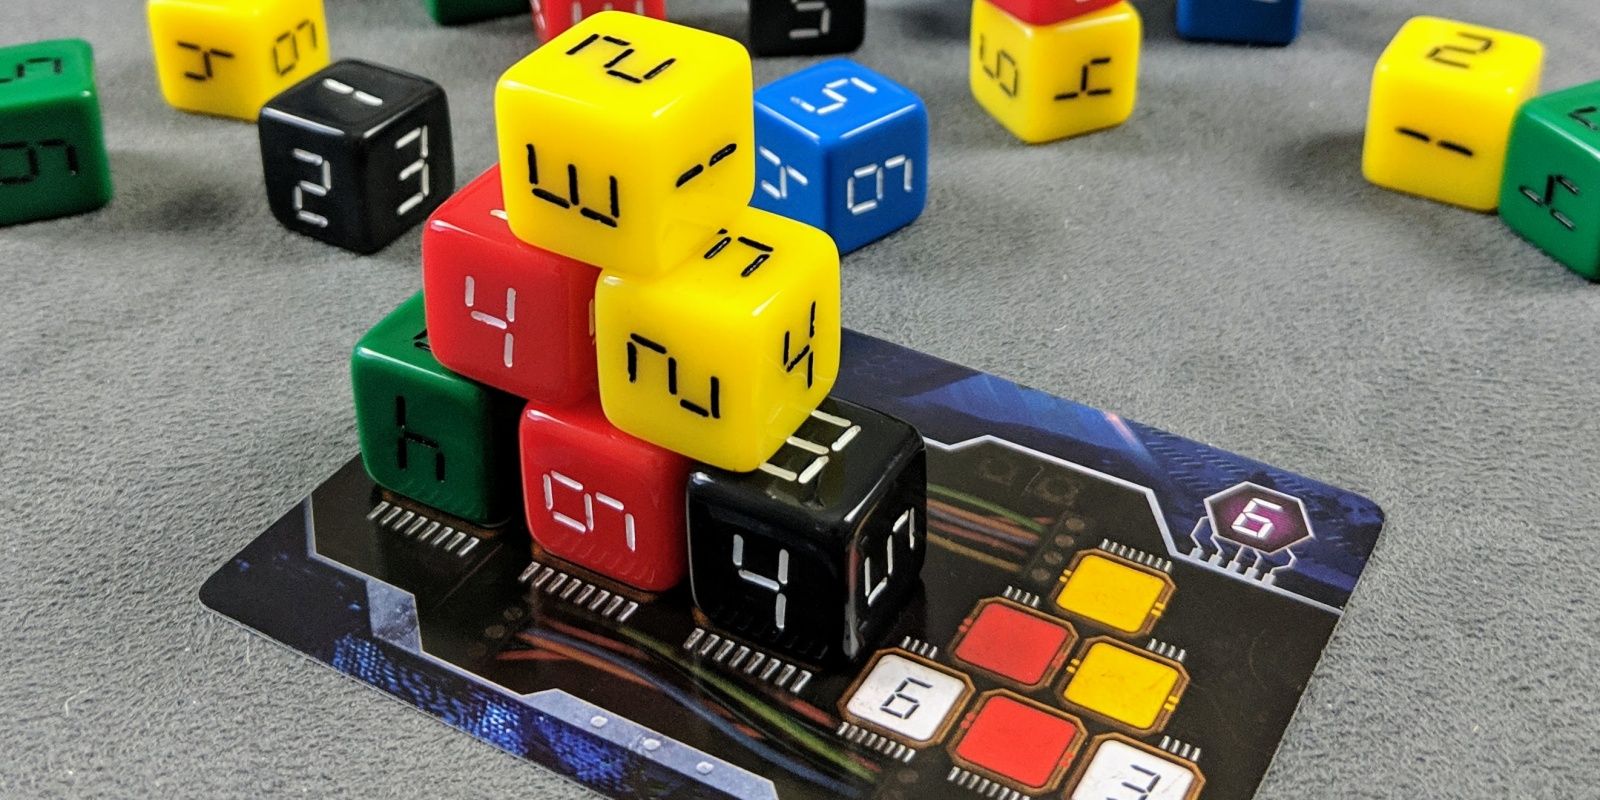 Fuse Board Game Being Played On The Table